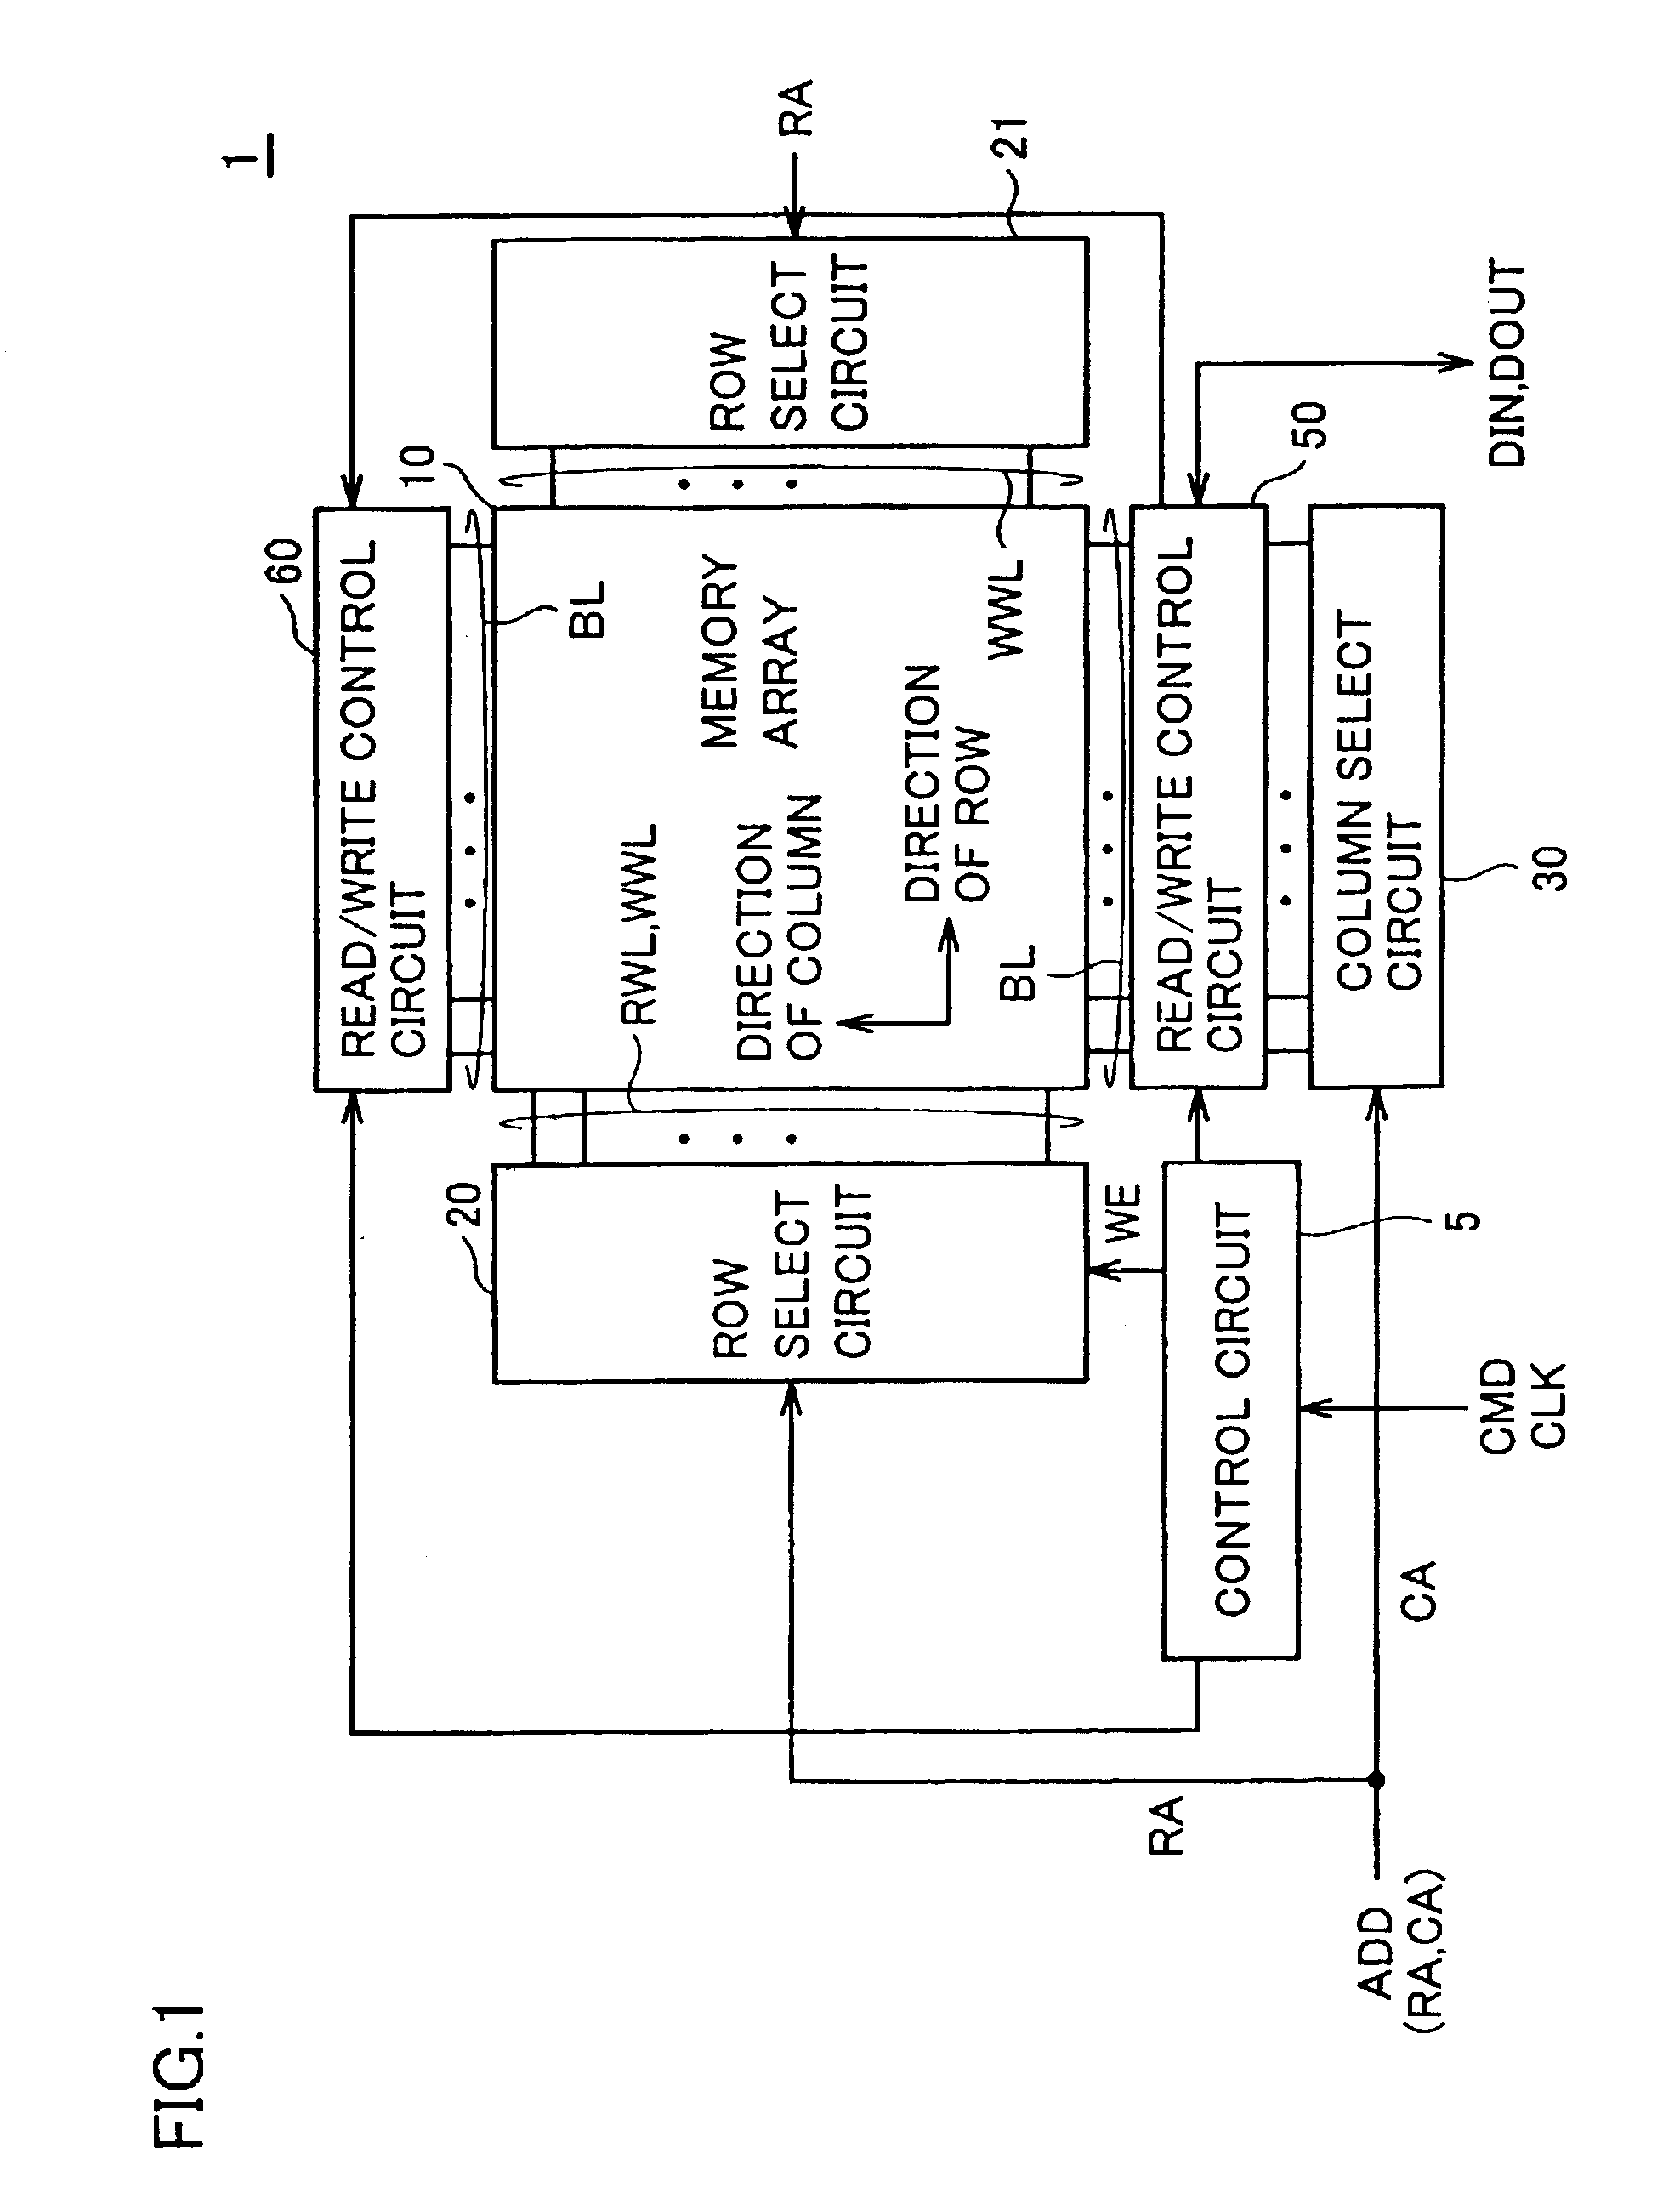 Thin film magnetic memory device applying a magnetic field to write data